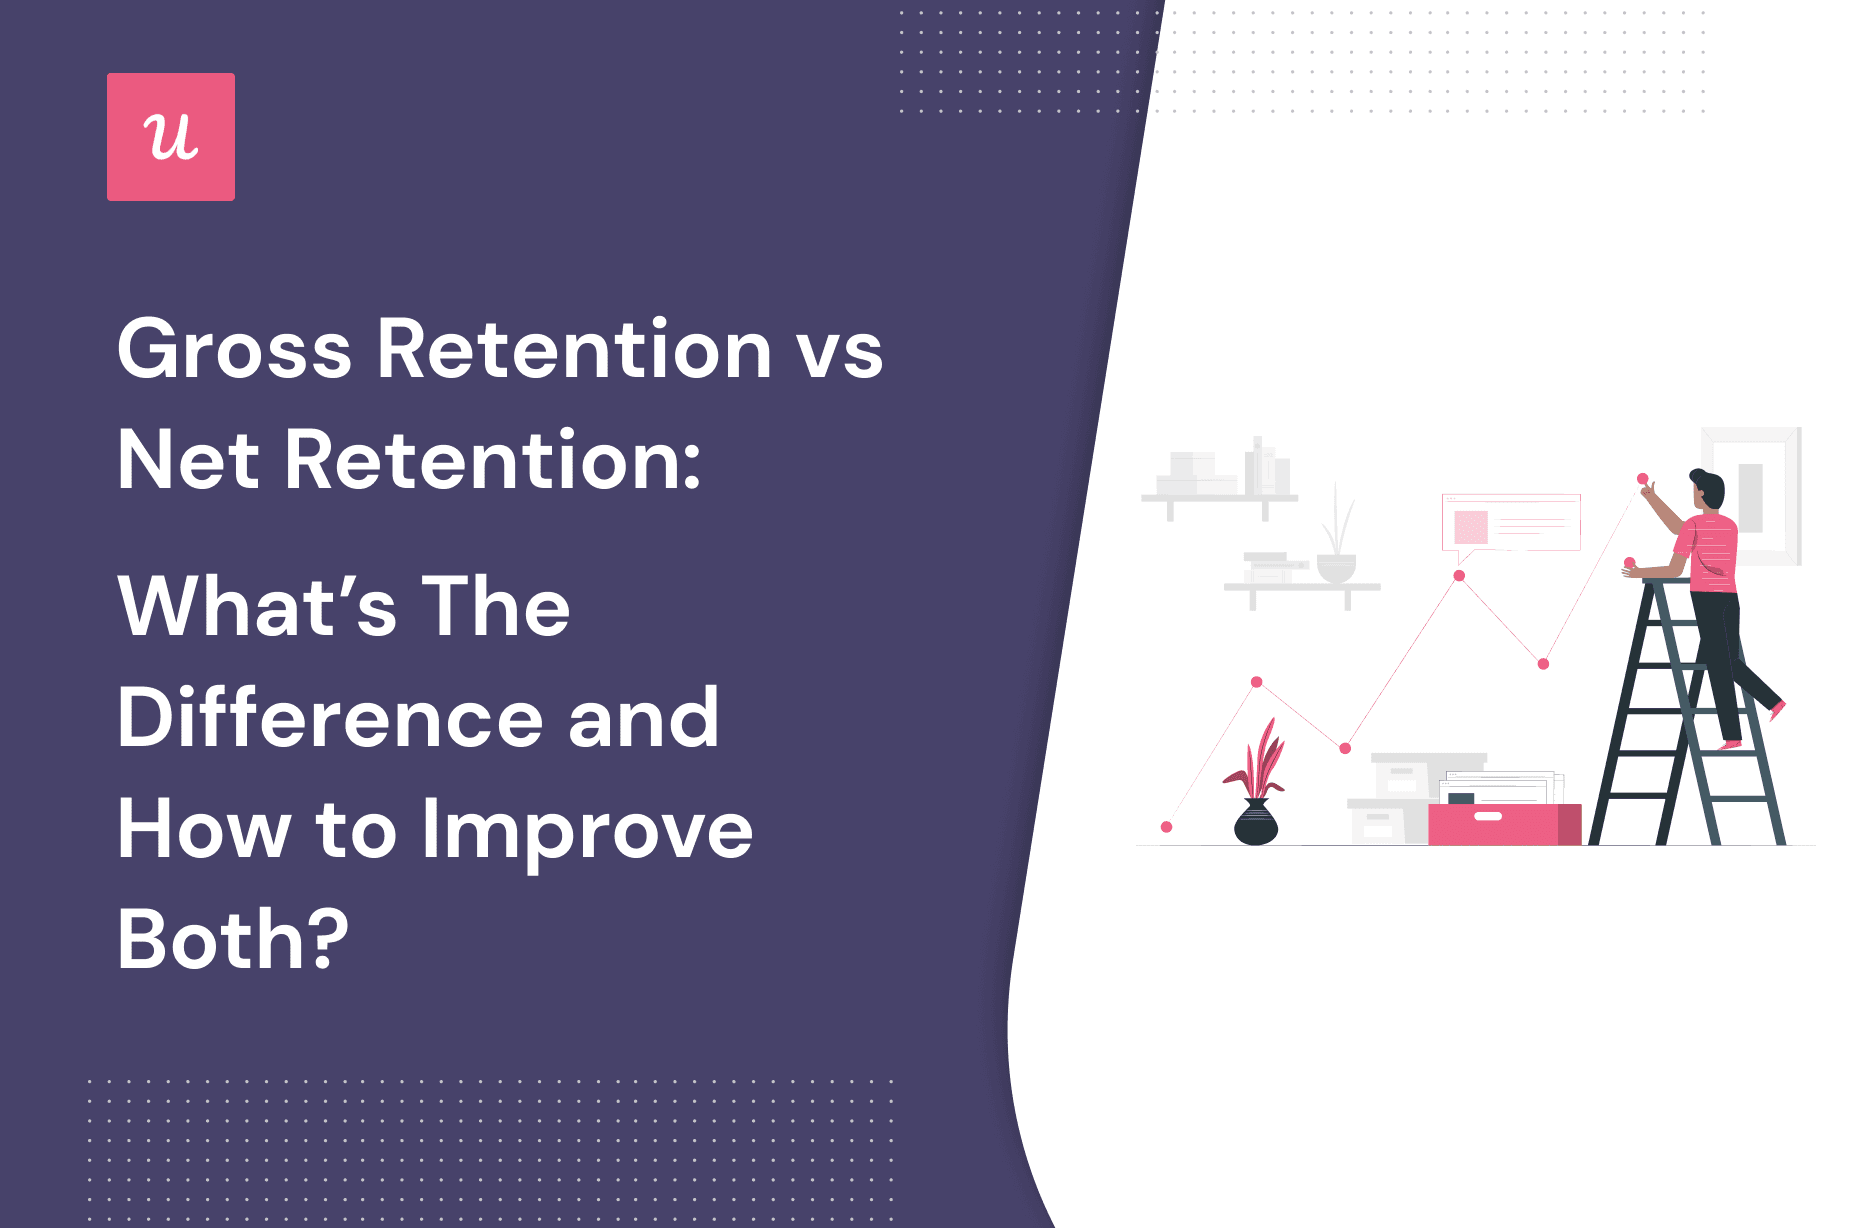 Gross Retention vs Net Retention: What’s the Difference and How To Improve Both?